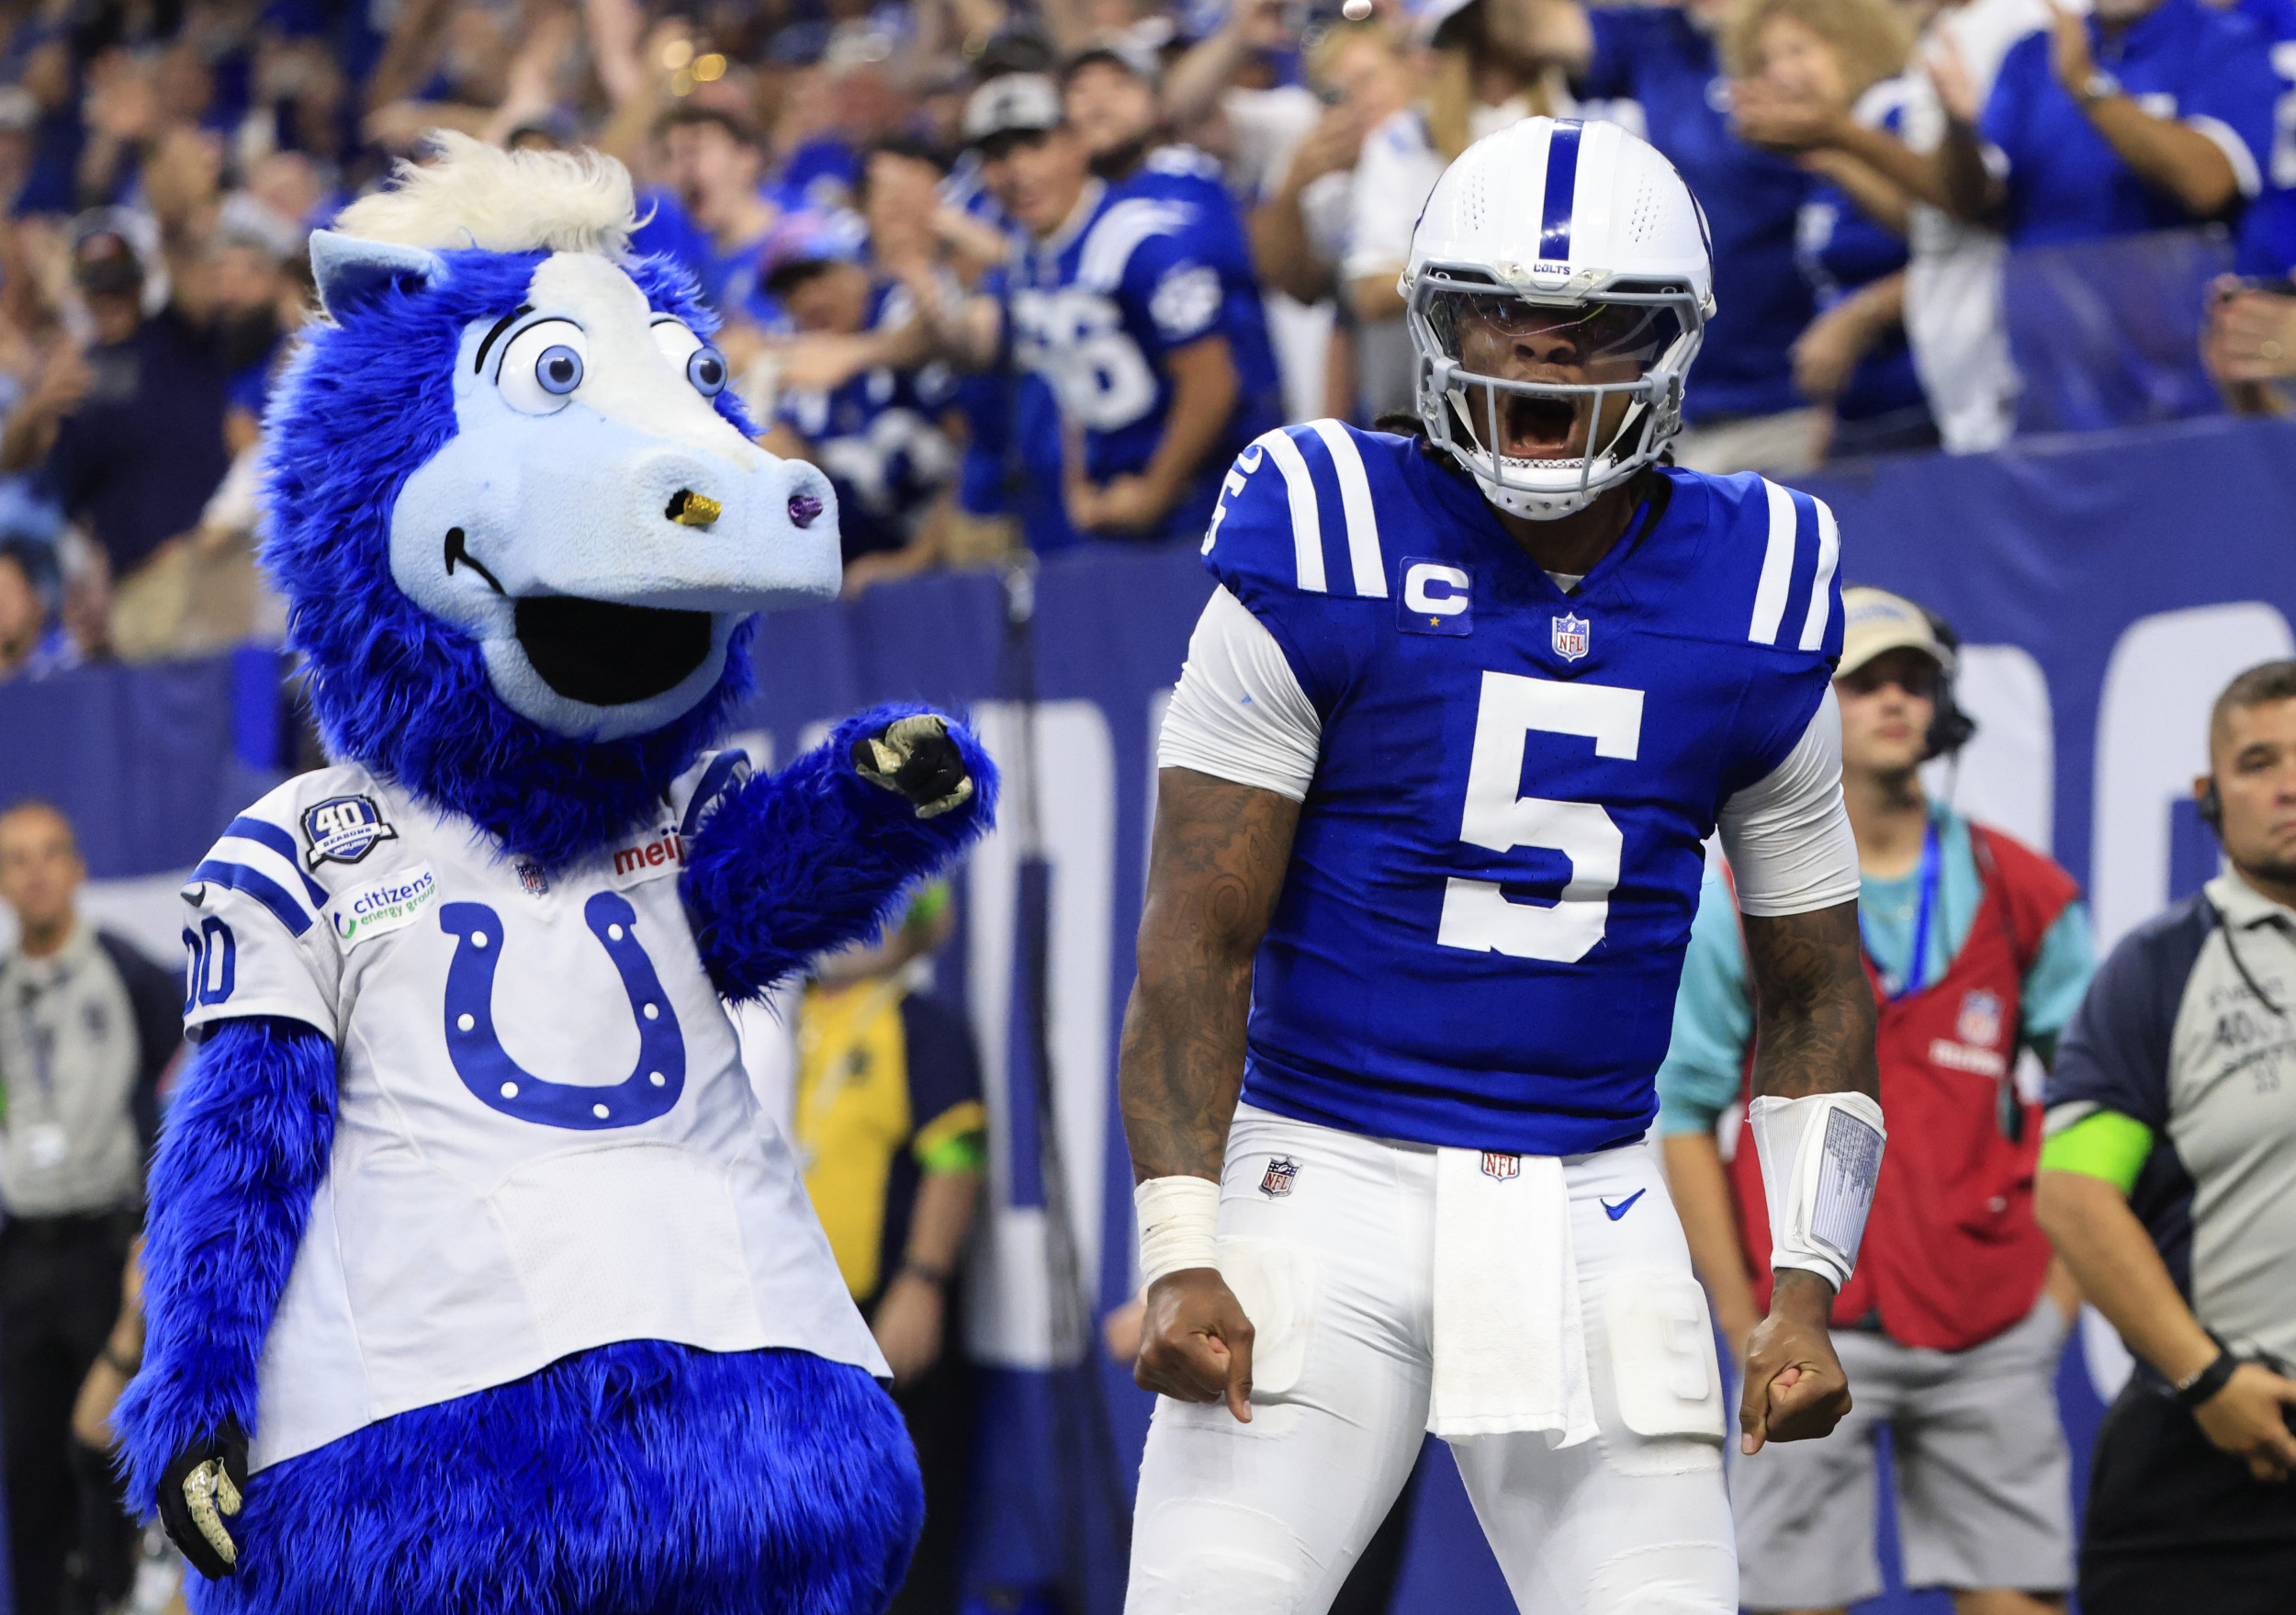 How To Watch Colts vs. Texans Week 2 NFL Game: TV, Betting Info